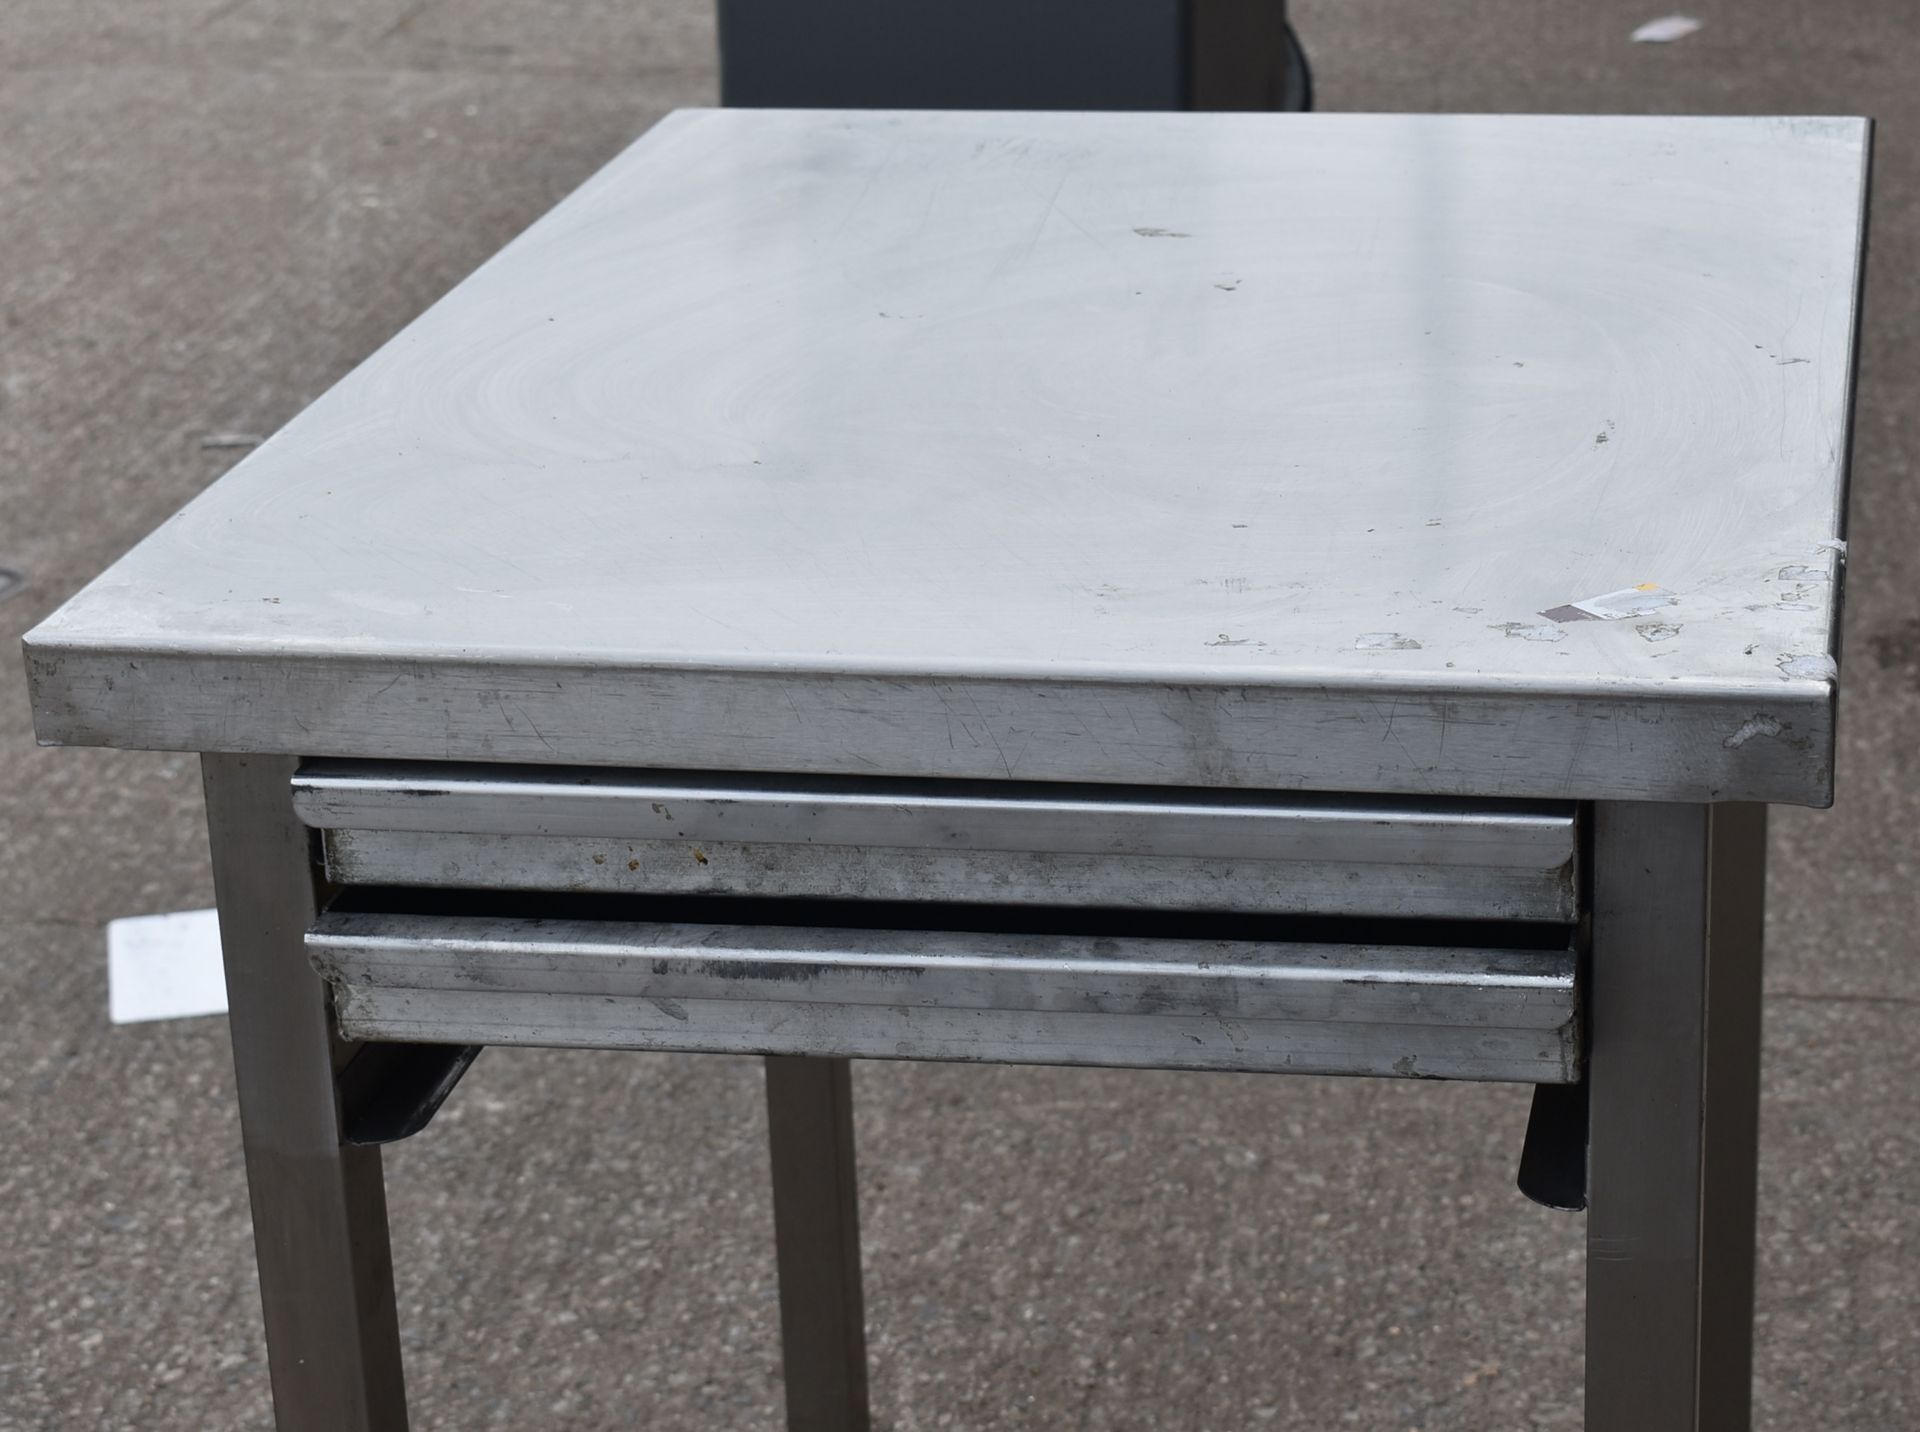 1 x Bakers Prep Table With Pull Out Tray Drawers - Dimensions: H x W x D cms - Recently Removed From - Image 3 of 6